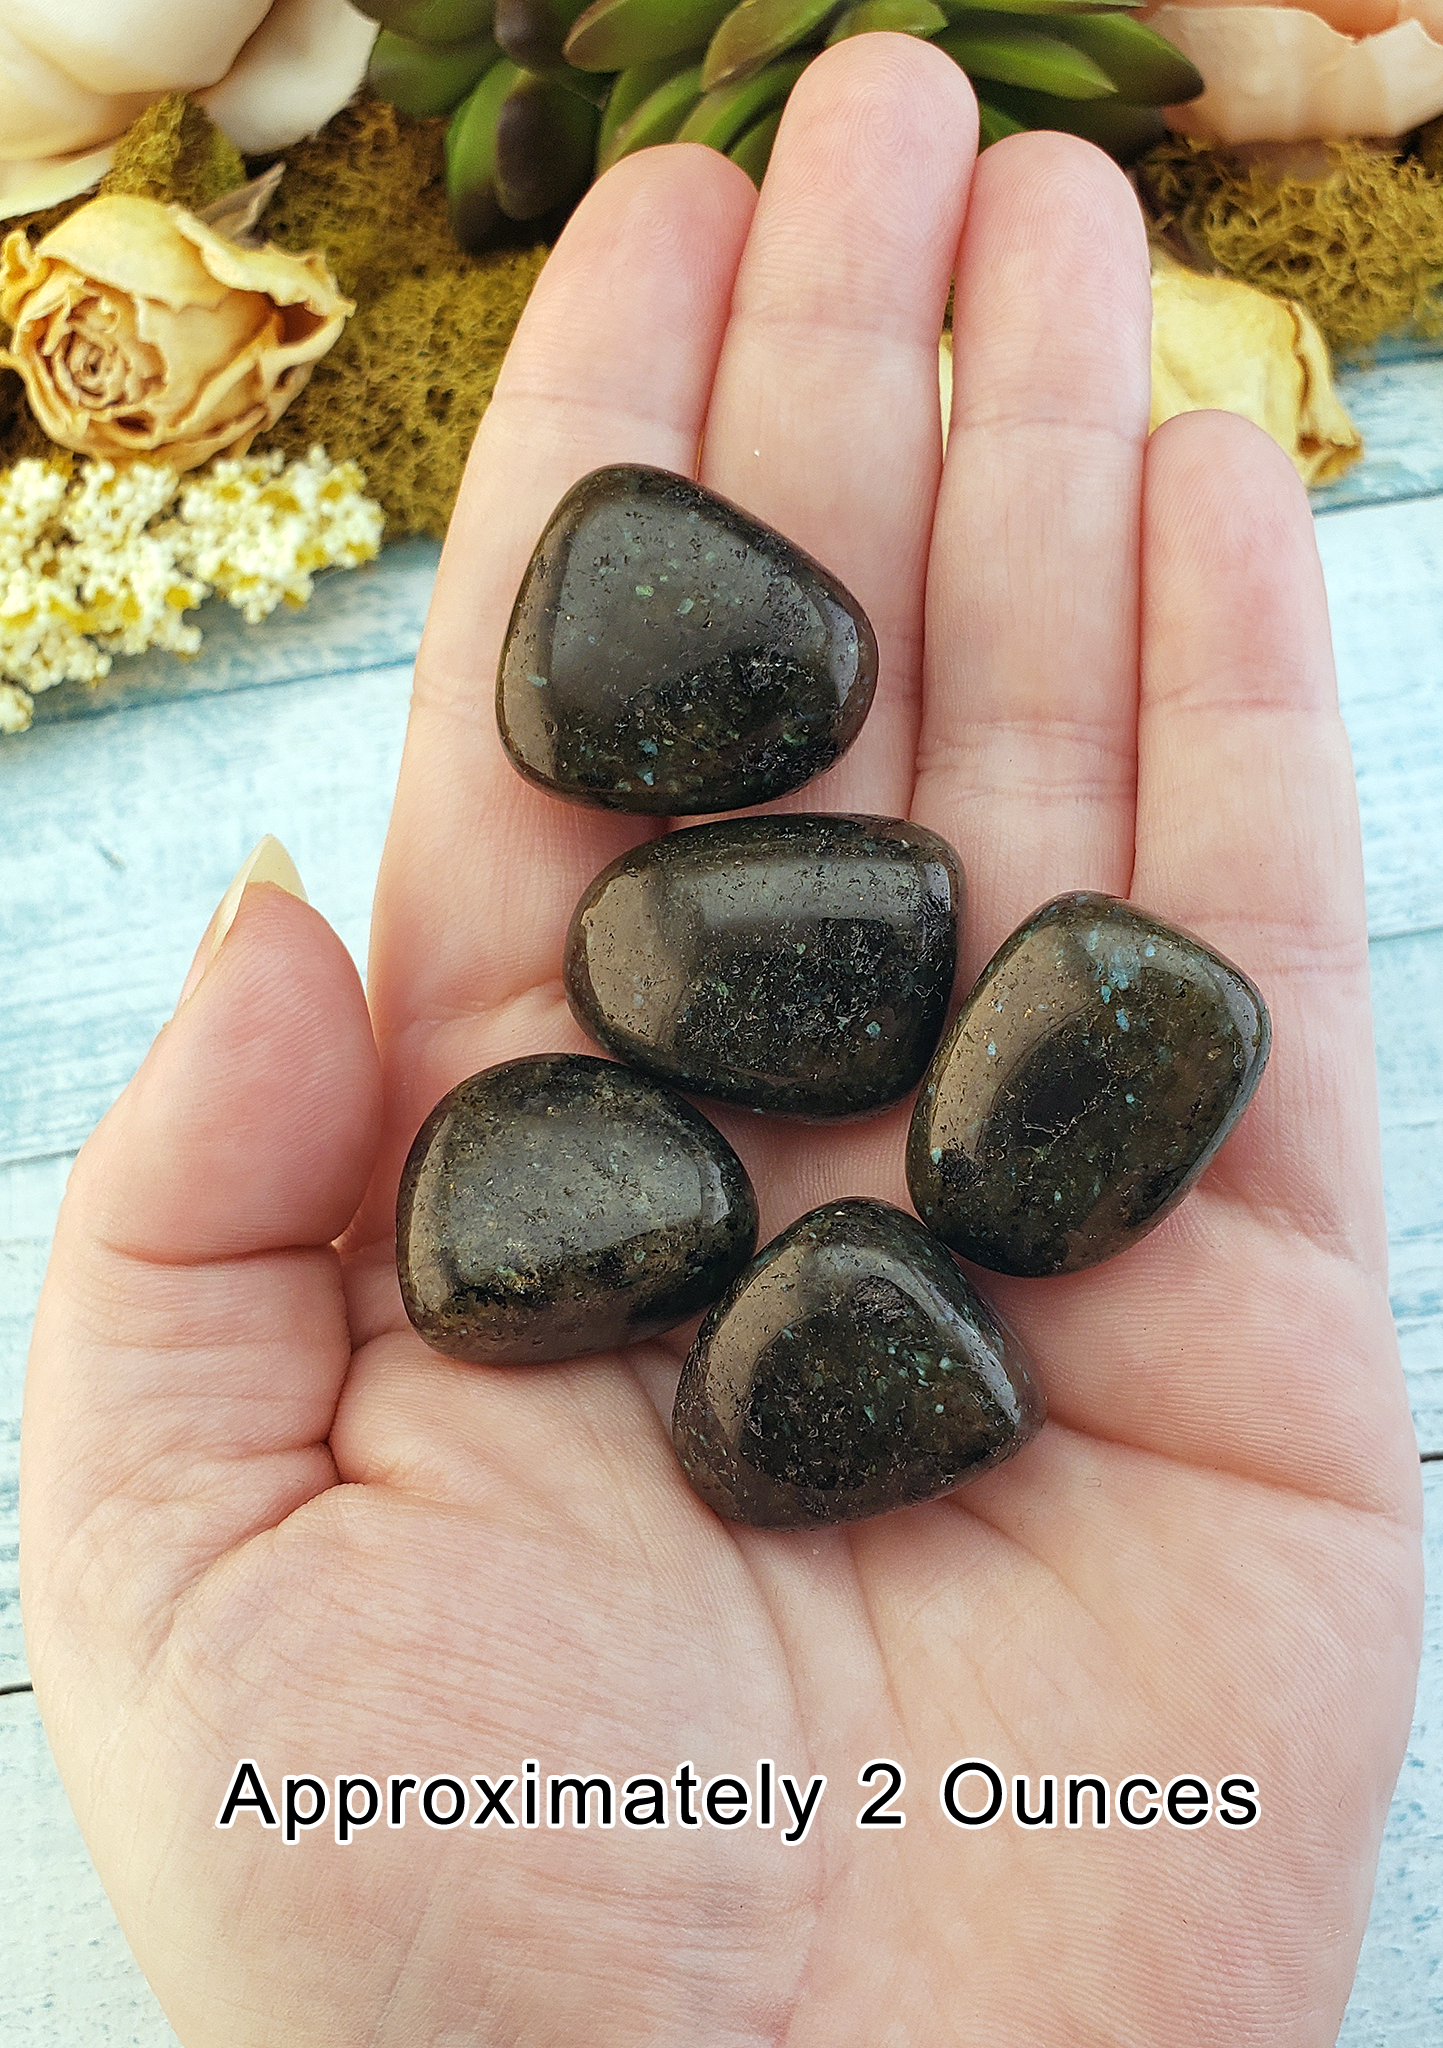 Micro Labradorite Tumbled Polished Natural Gemstone - 2 Ounces in Hand